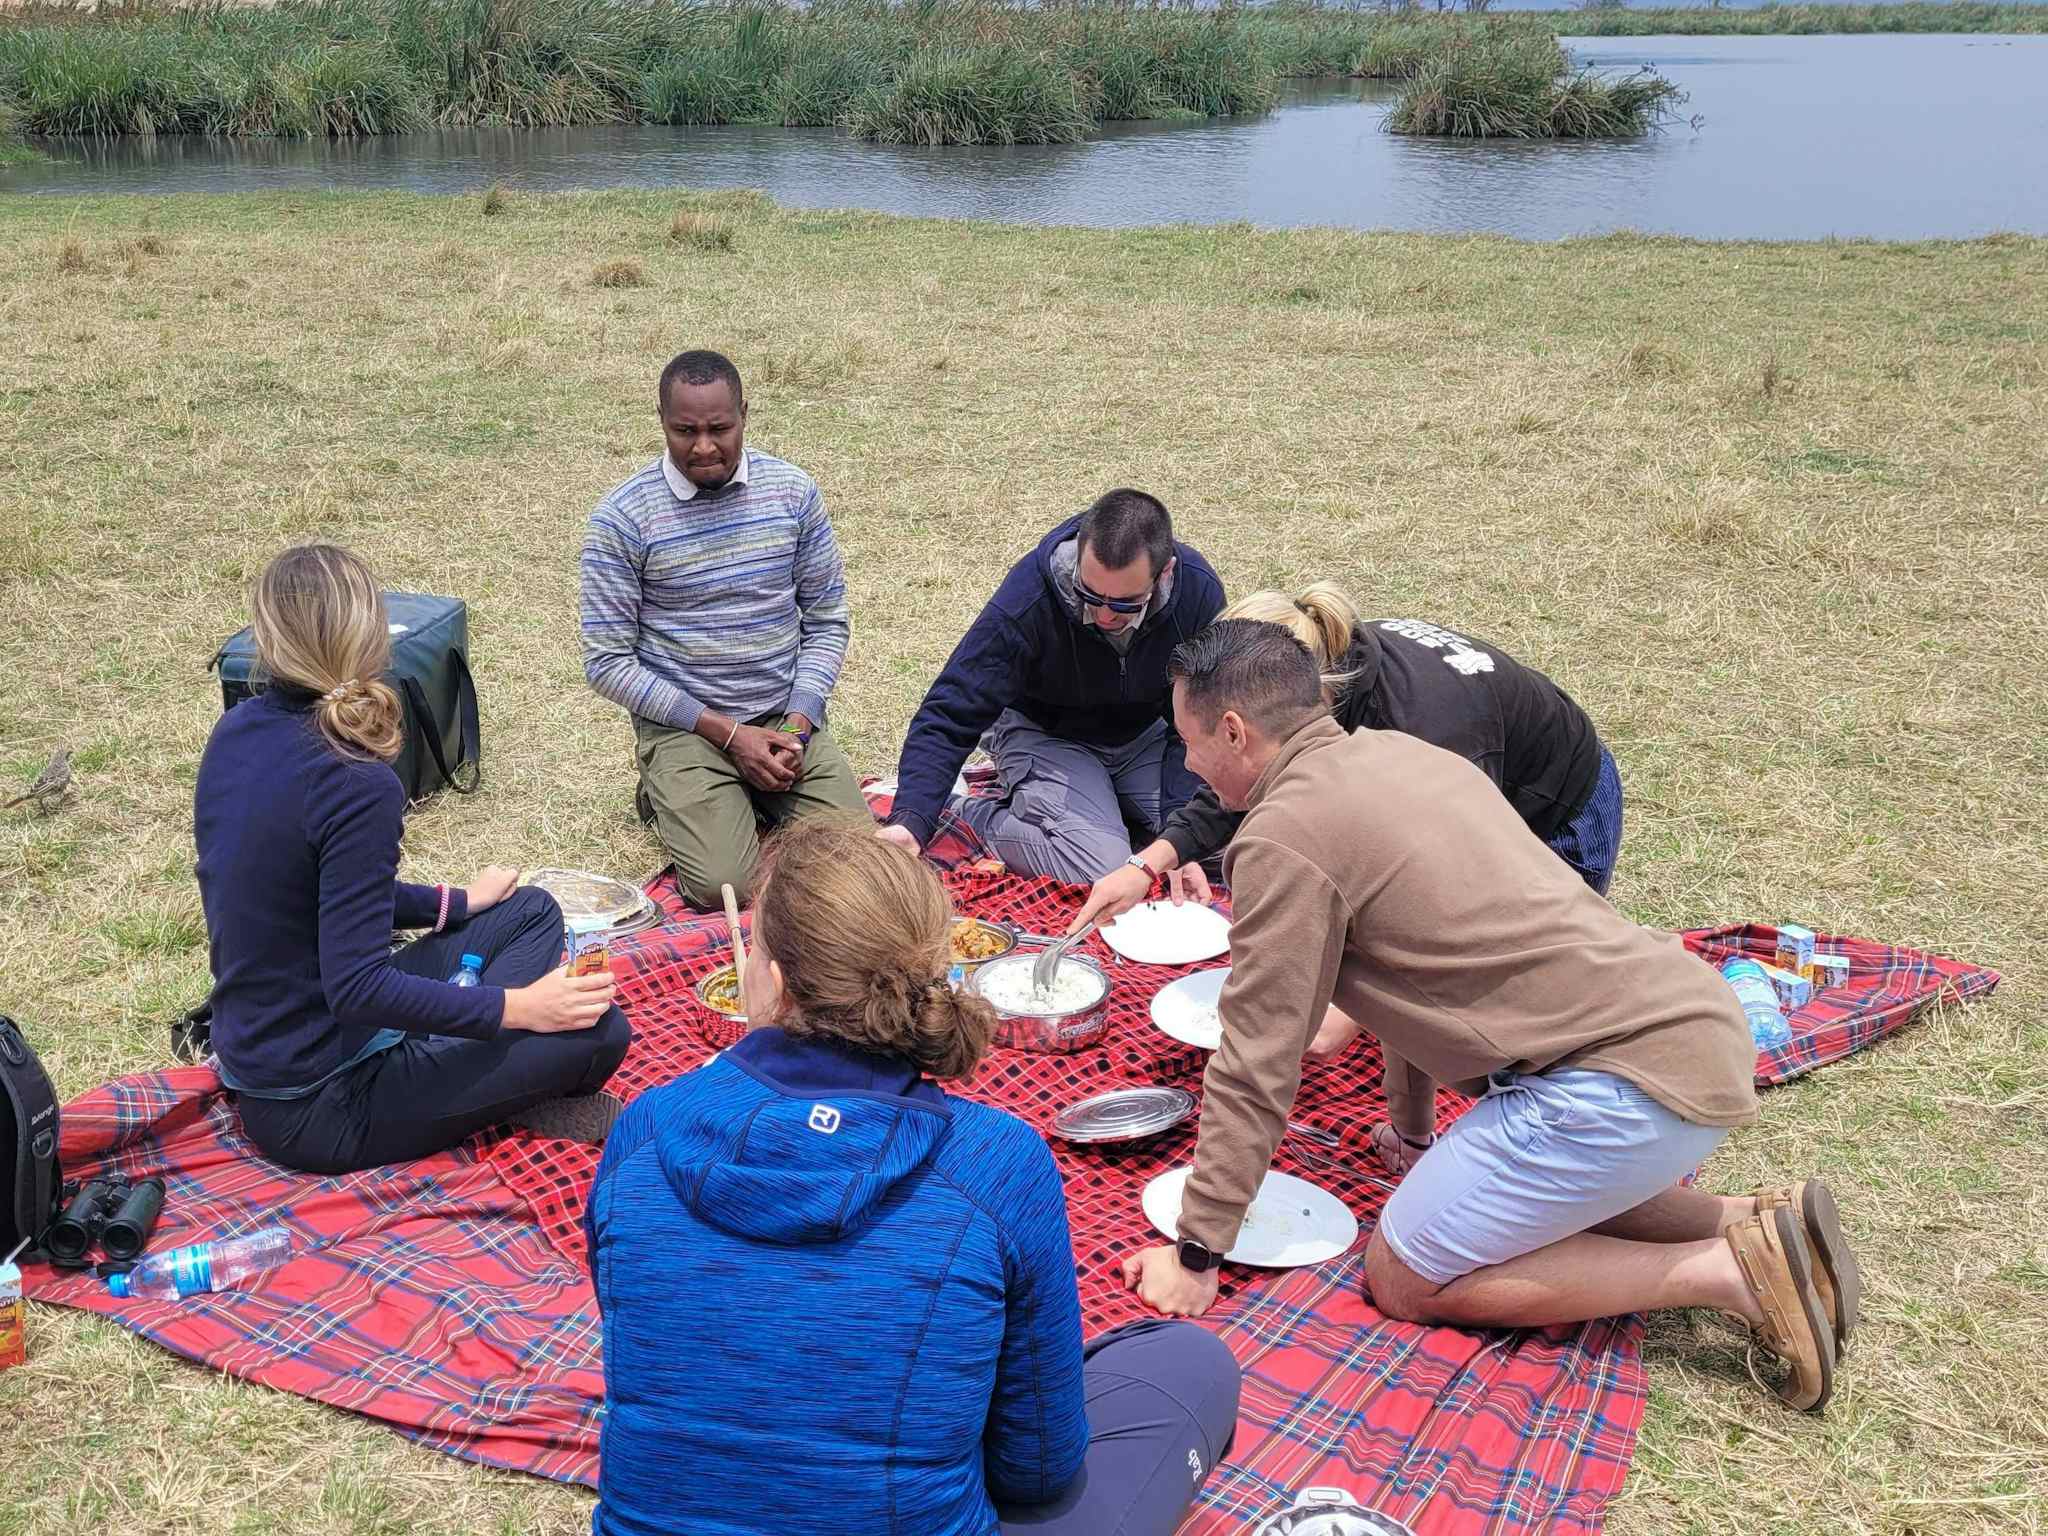 Group of people having a picnic by a lake in Ngorongoro Crater, Tanzania